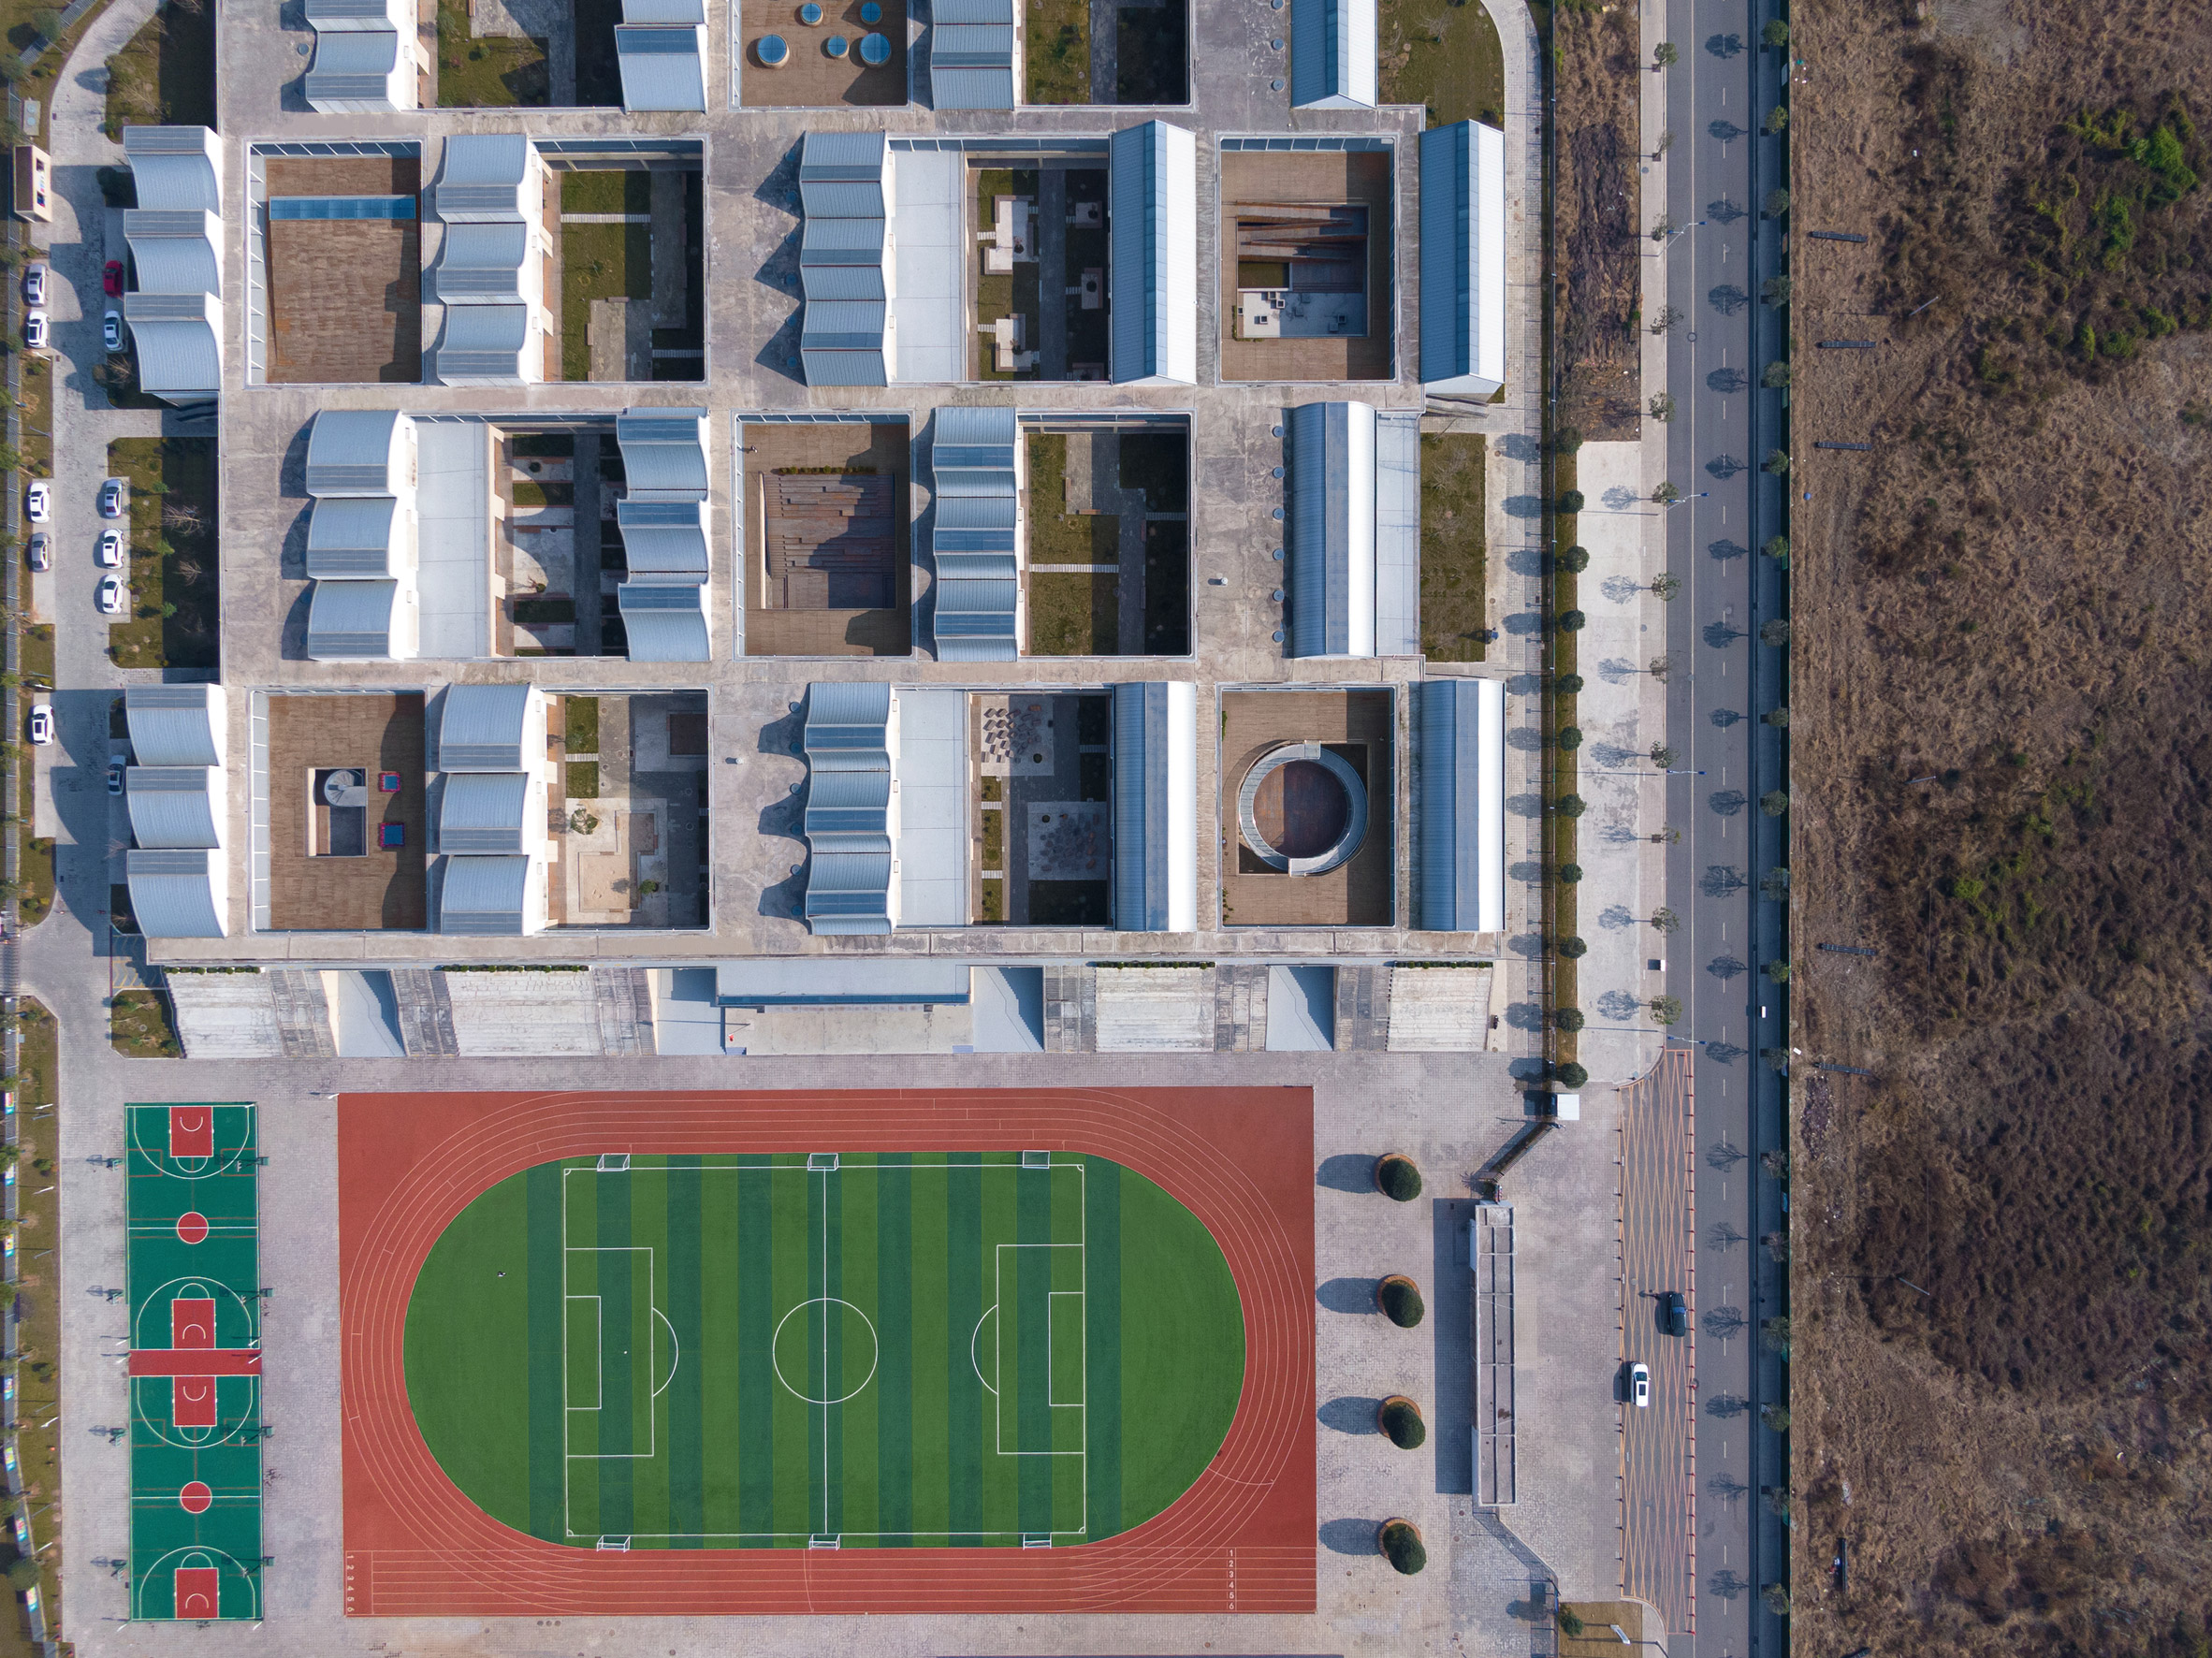 Aerial view of elementary school with mixture of roof shapes and football pitch